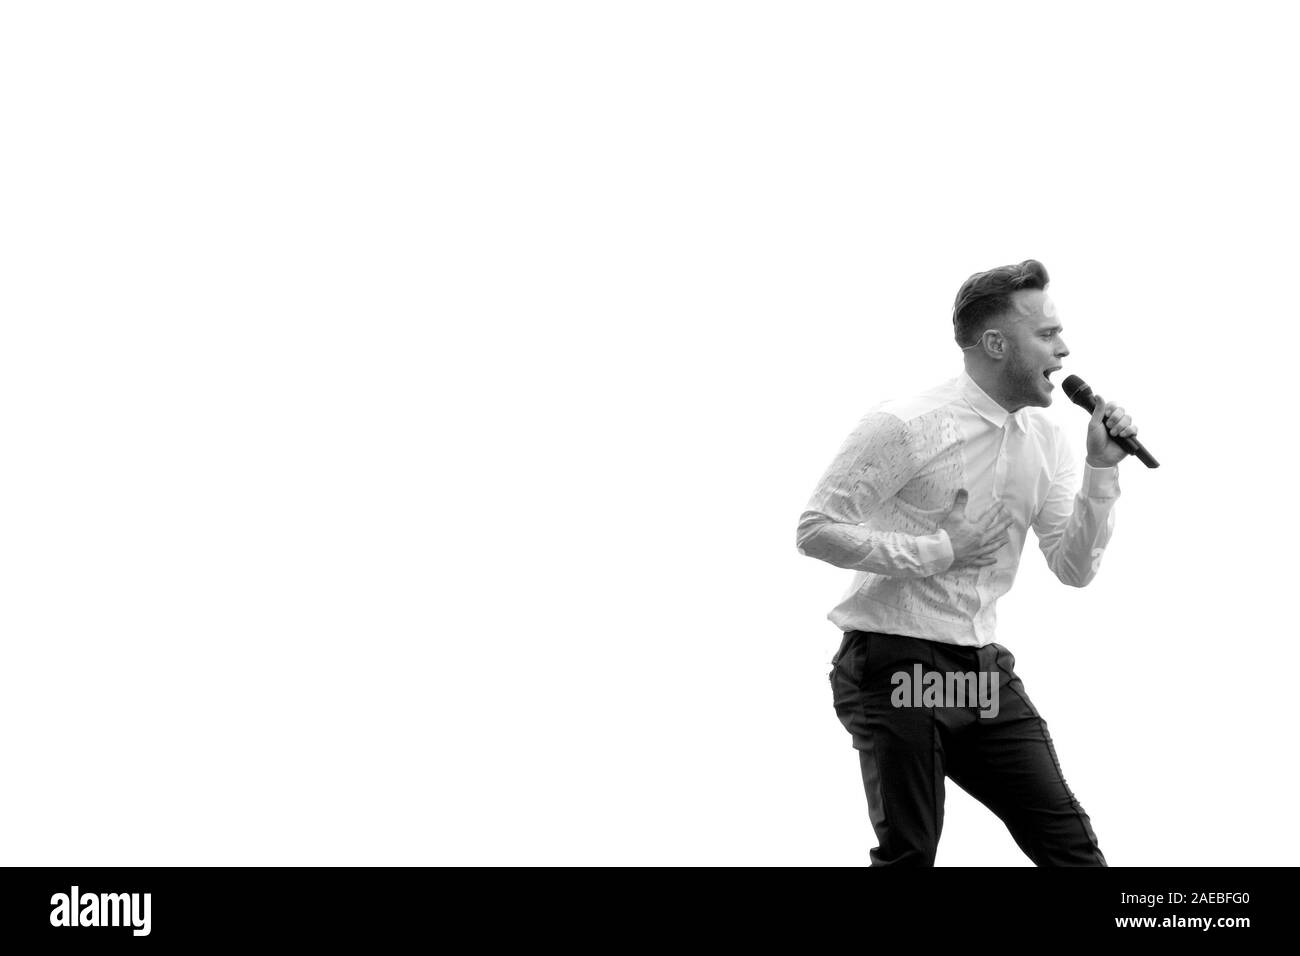 LONDON - JUL 09, 2016: Image digitally altered to monochrome Olly Murs performs at the Barclaycard British Summer Time Event in Hyde Park on Jul 09, 2016 in London Stock Photo